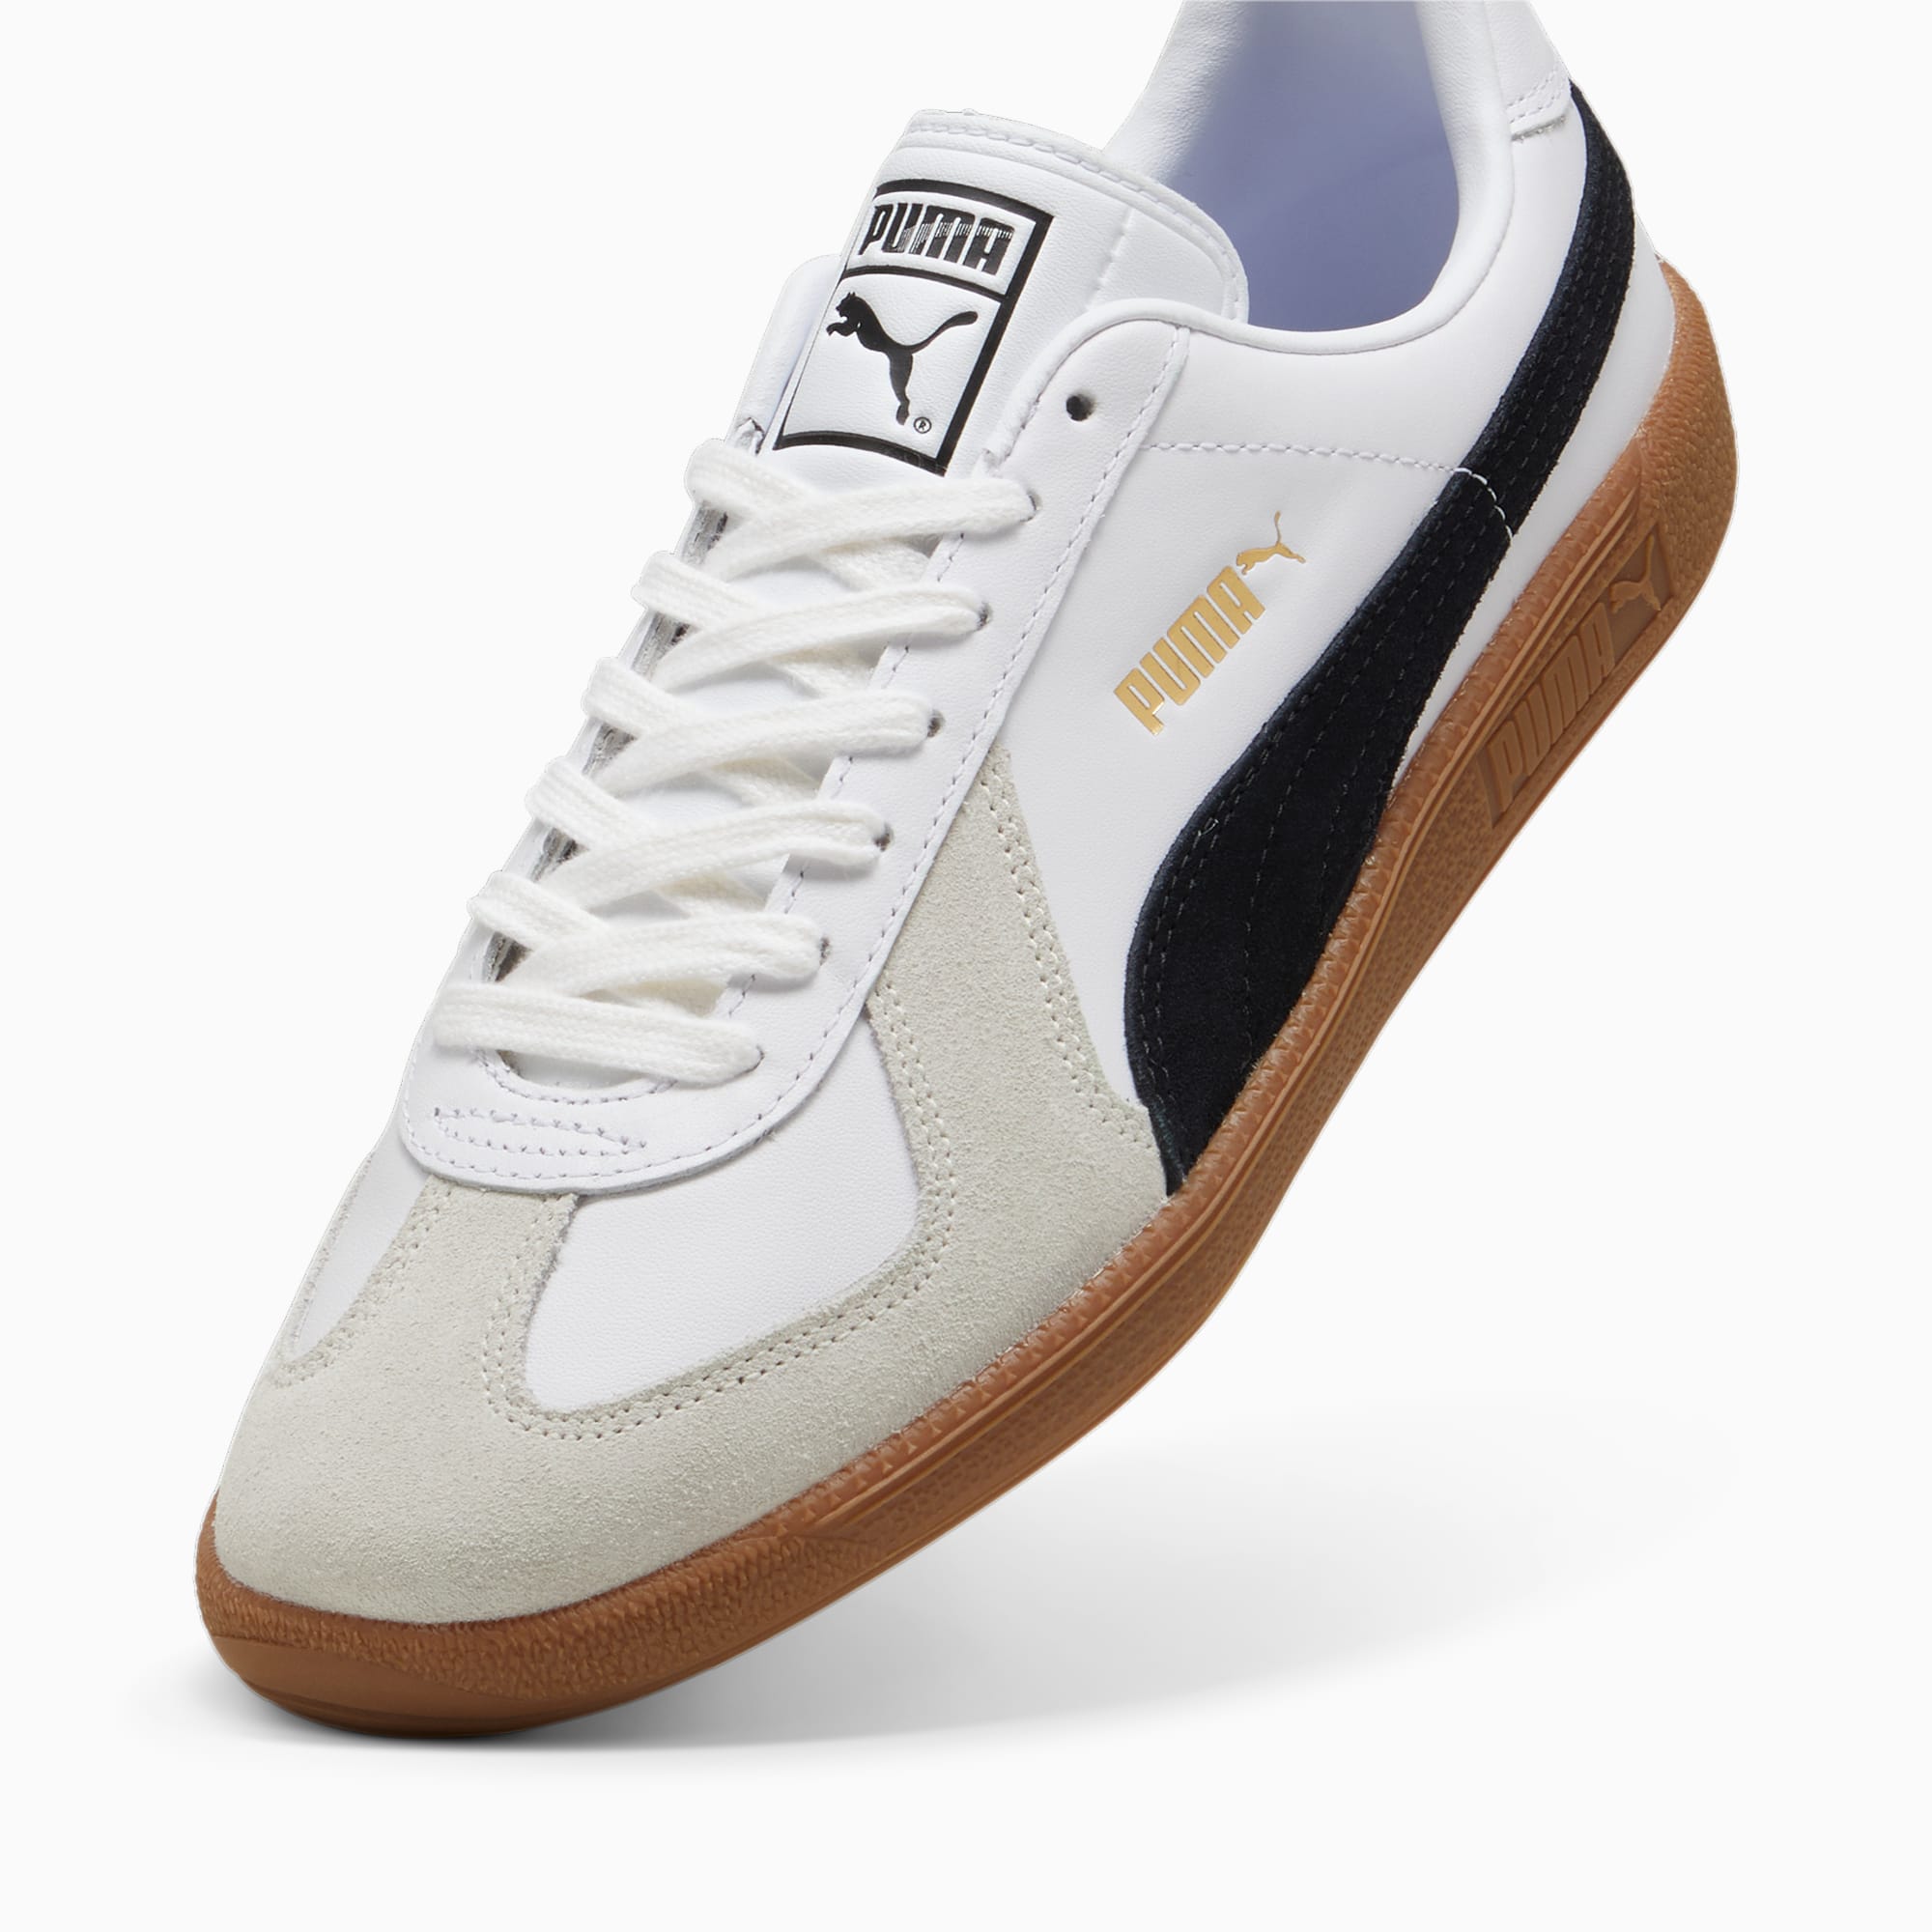 Women's PUMA Army Trainer Sneakers, White/Black/Gum, Size 35,5, Shoes